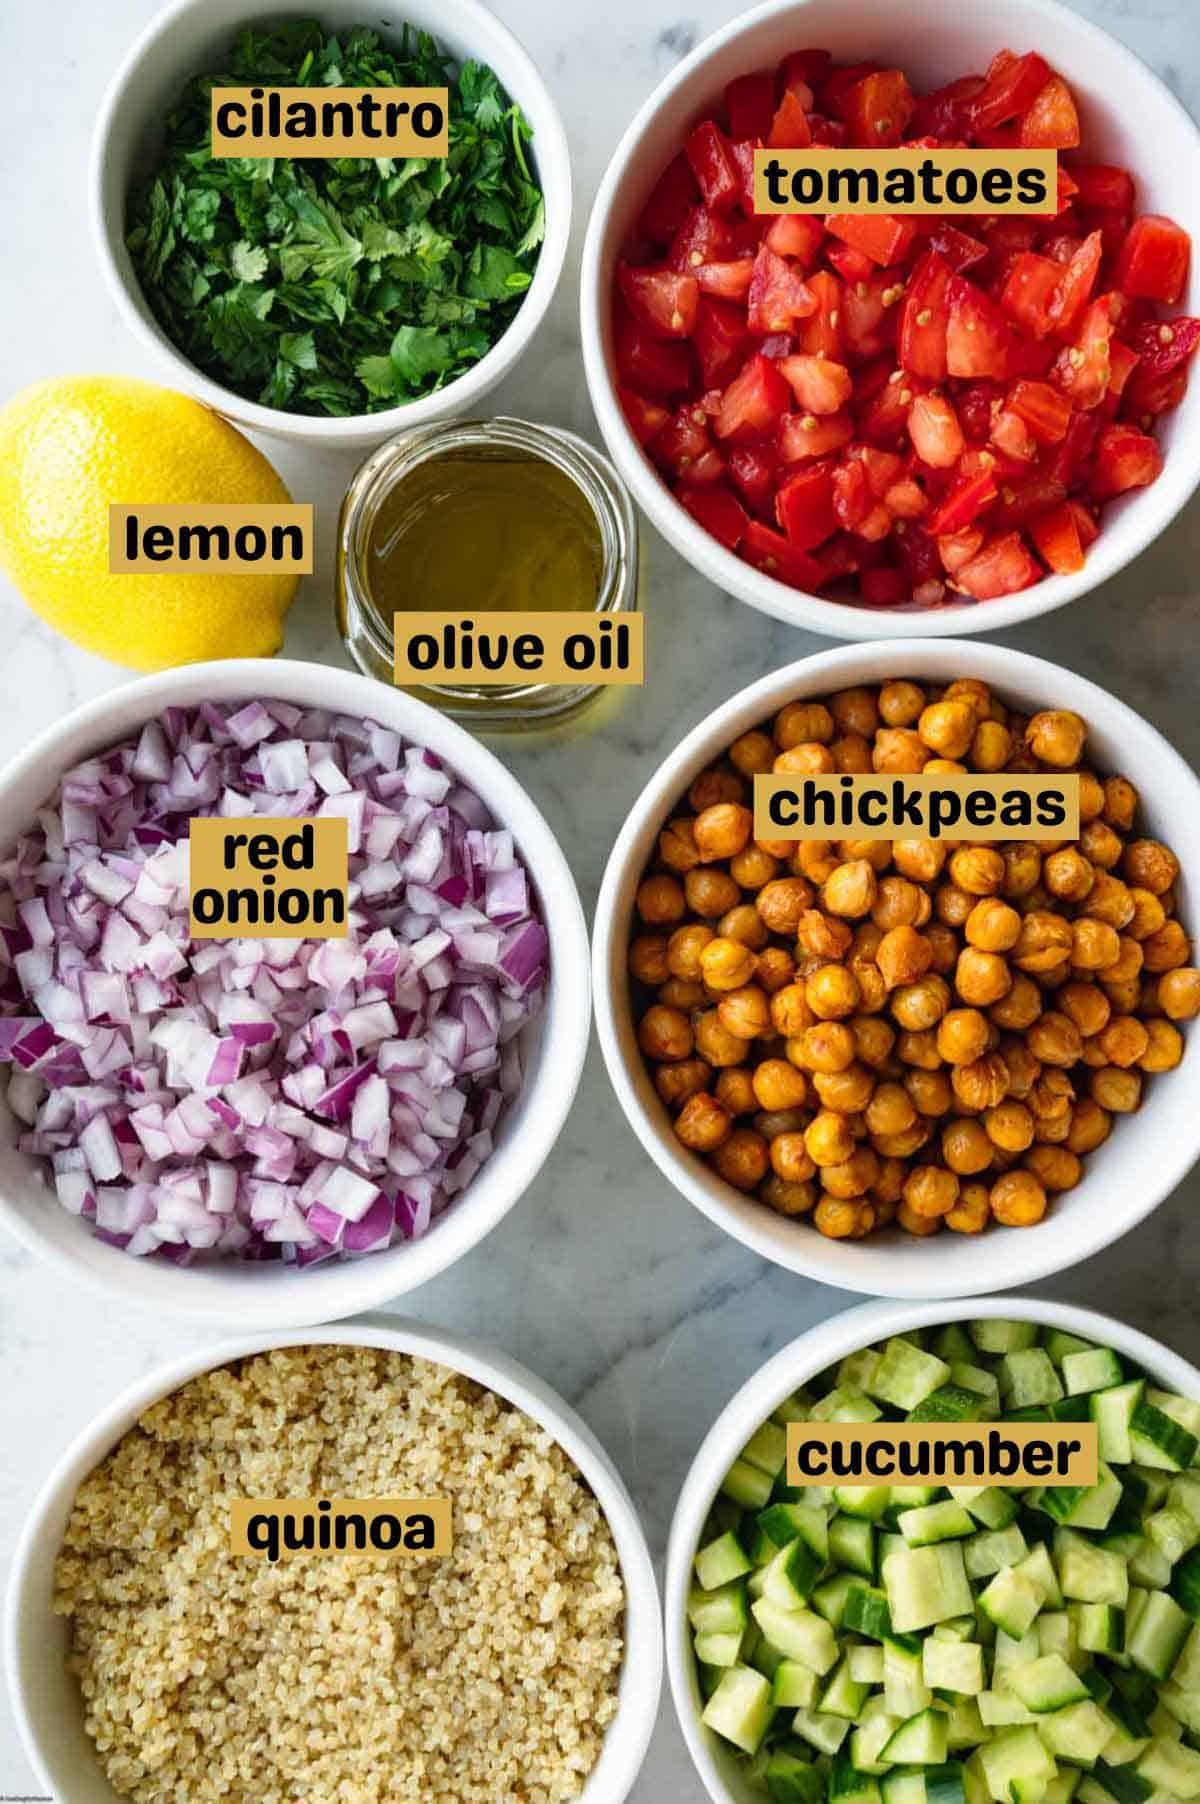 Olive oil in jar, chopped cucumber, tomato, red onion, cilantro, roasted chickpeas, and quinoa, in white bowls, and a lemon.